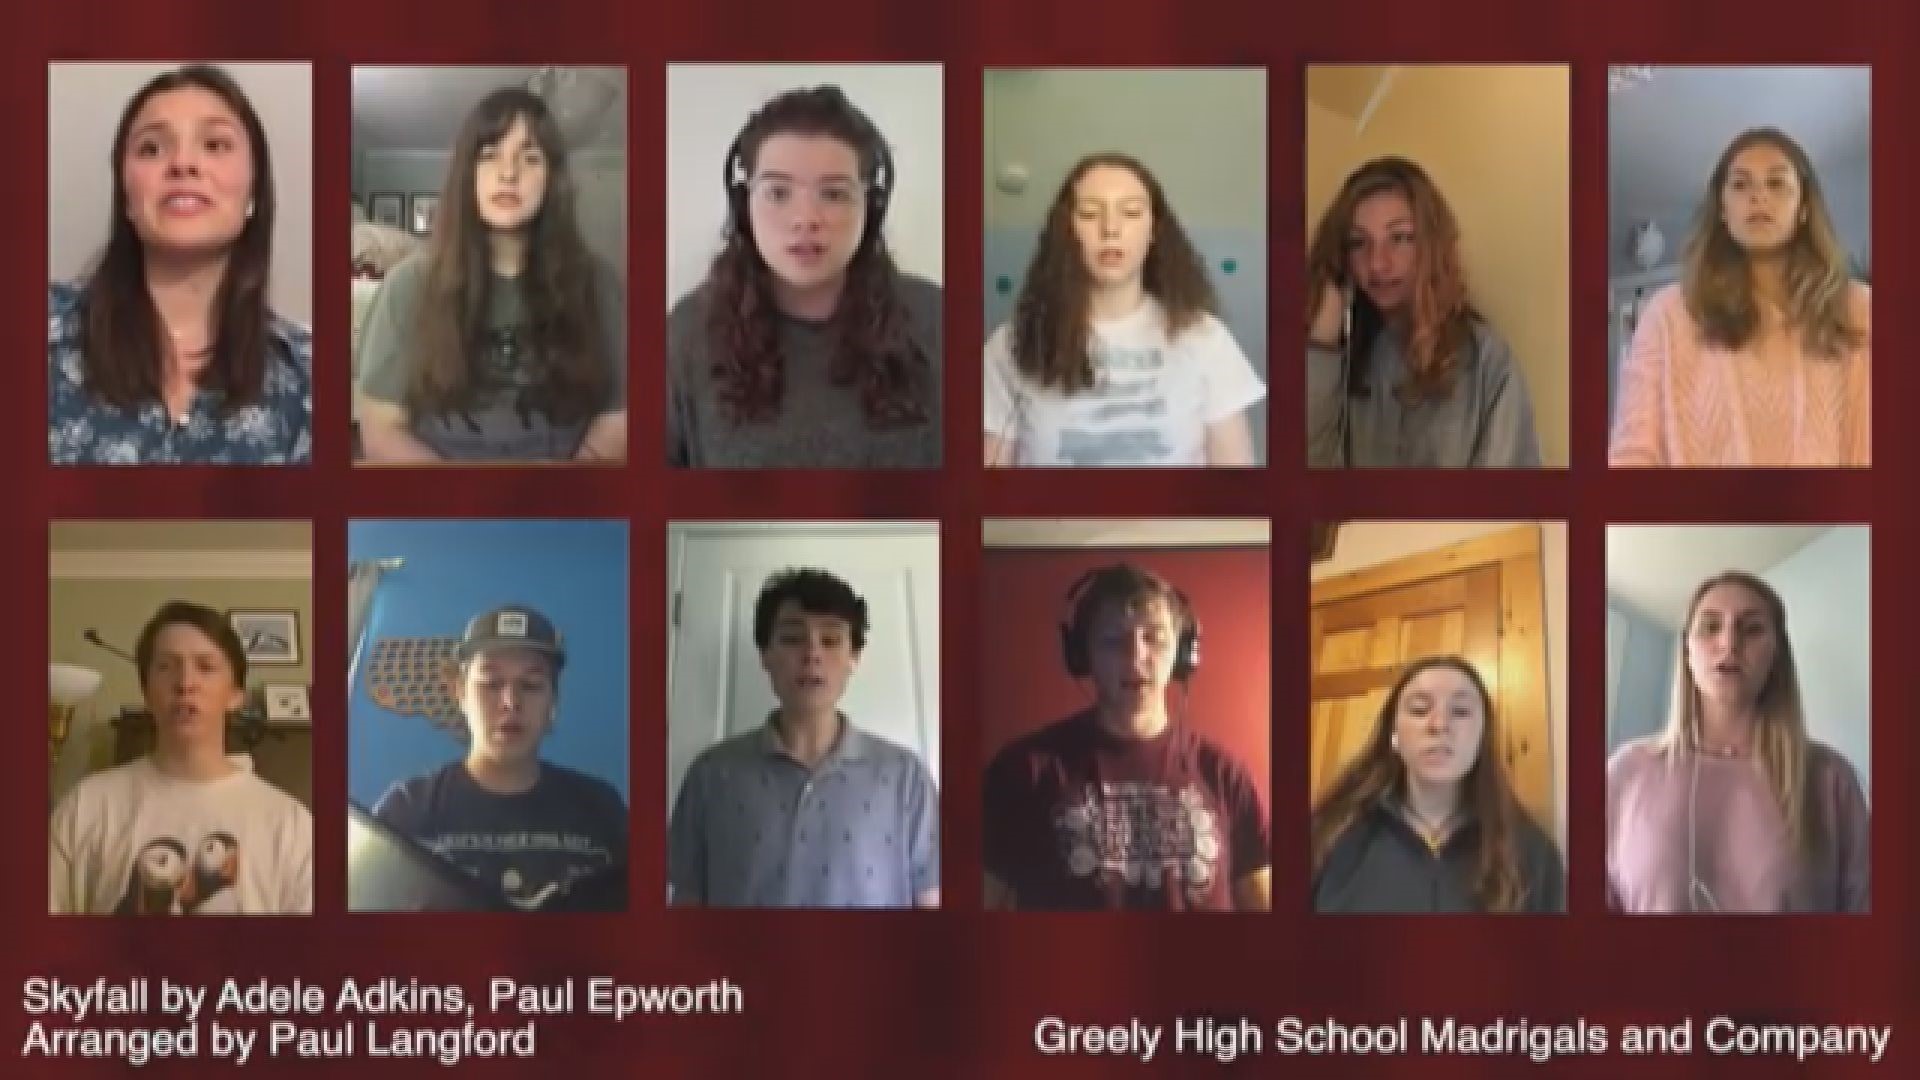 Virtual Choir Helps Unify Maine High School Students Voices While